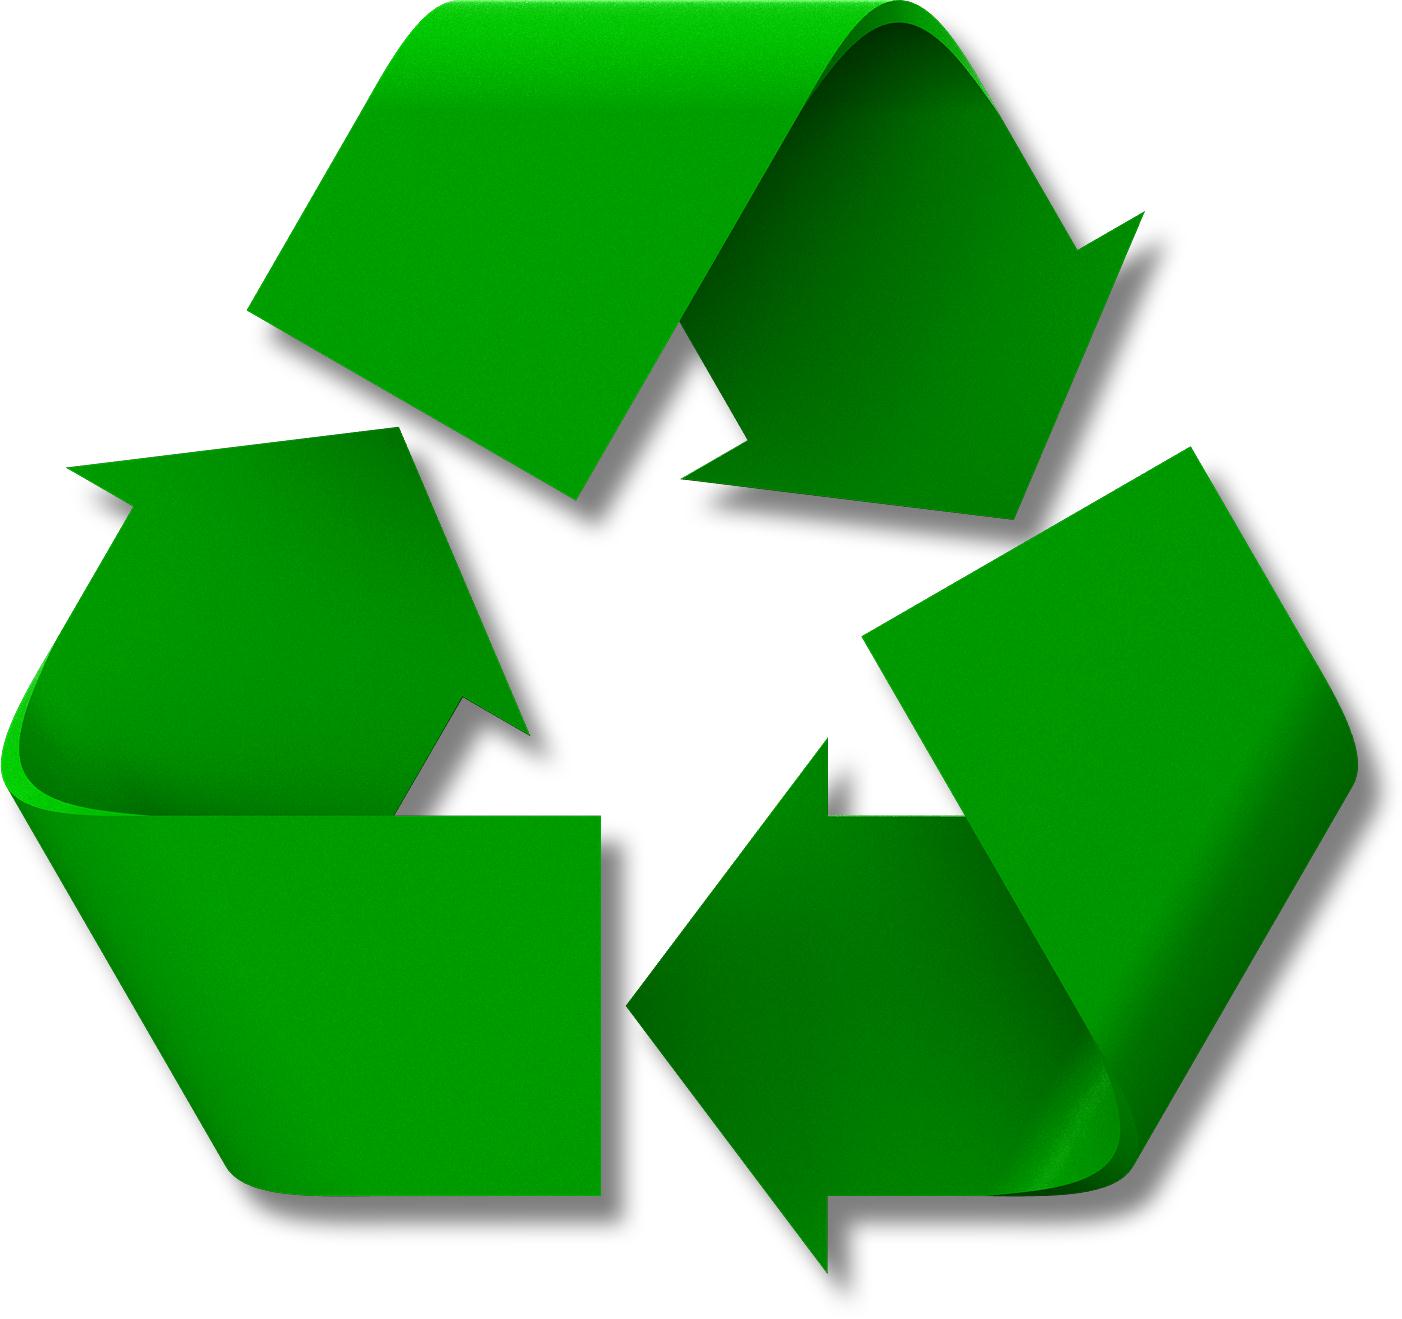 Recycle Bin Pictures   Clipart Best